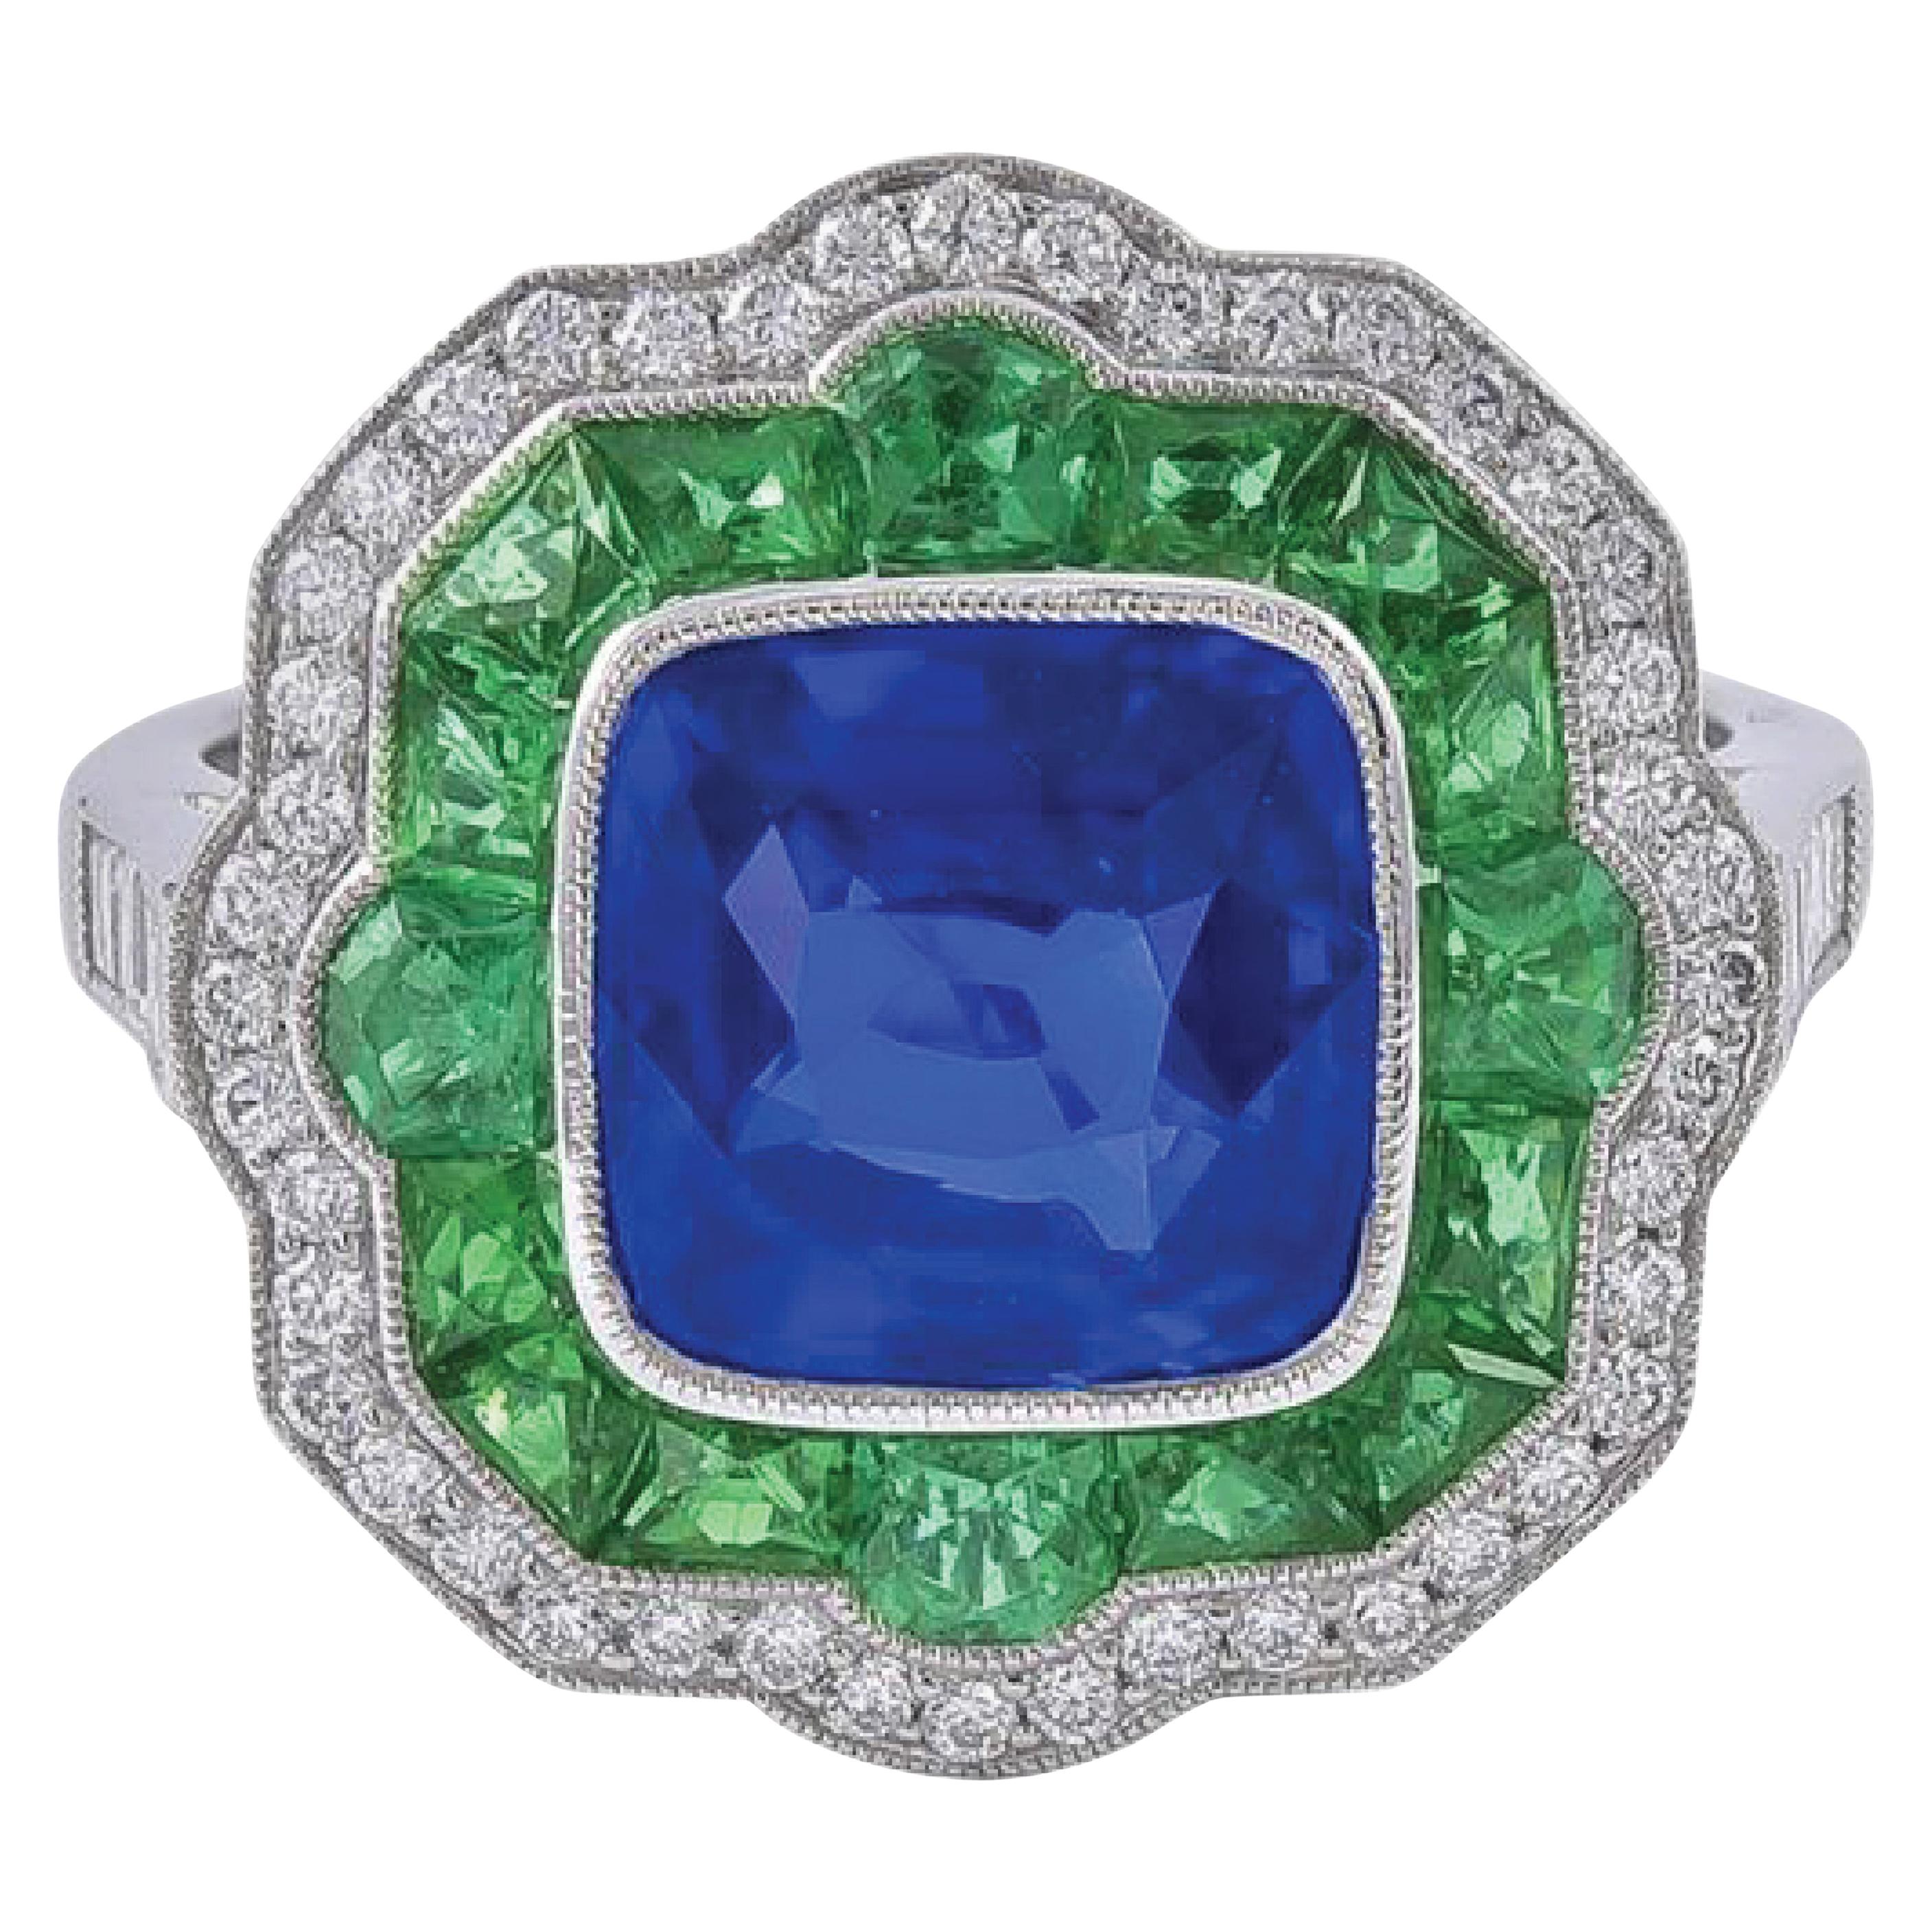 Sophia D. Art Deco Inspired Ring with Sapphire, Emerald and Diamond